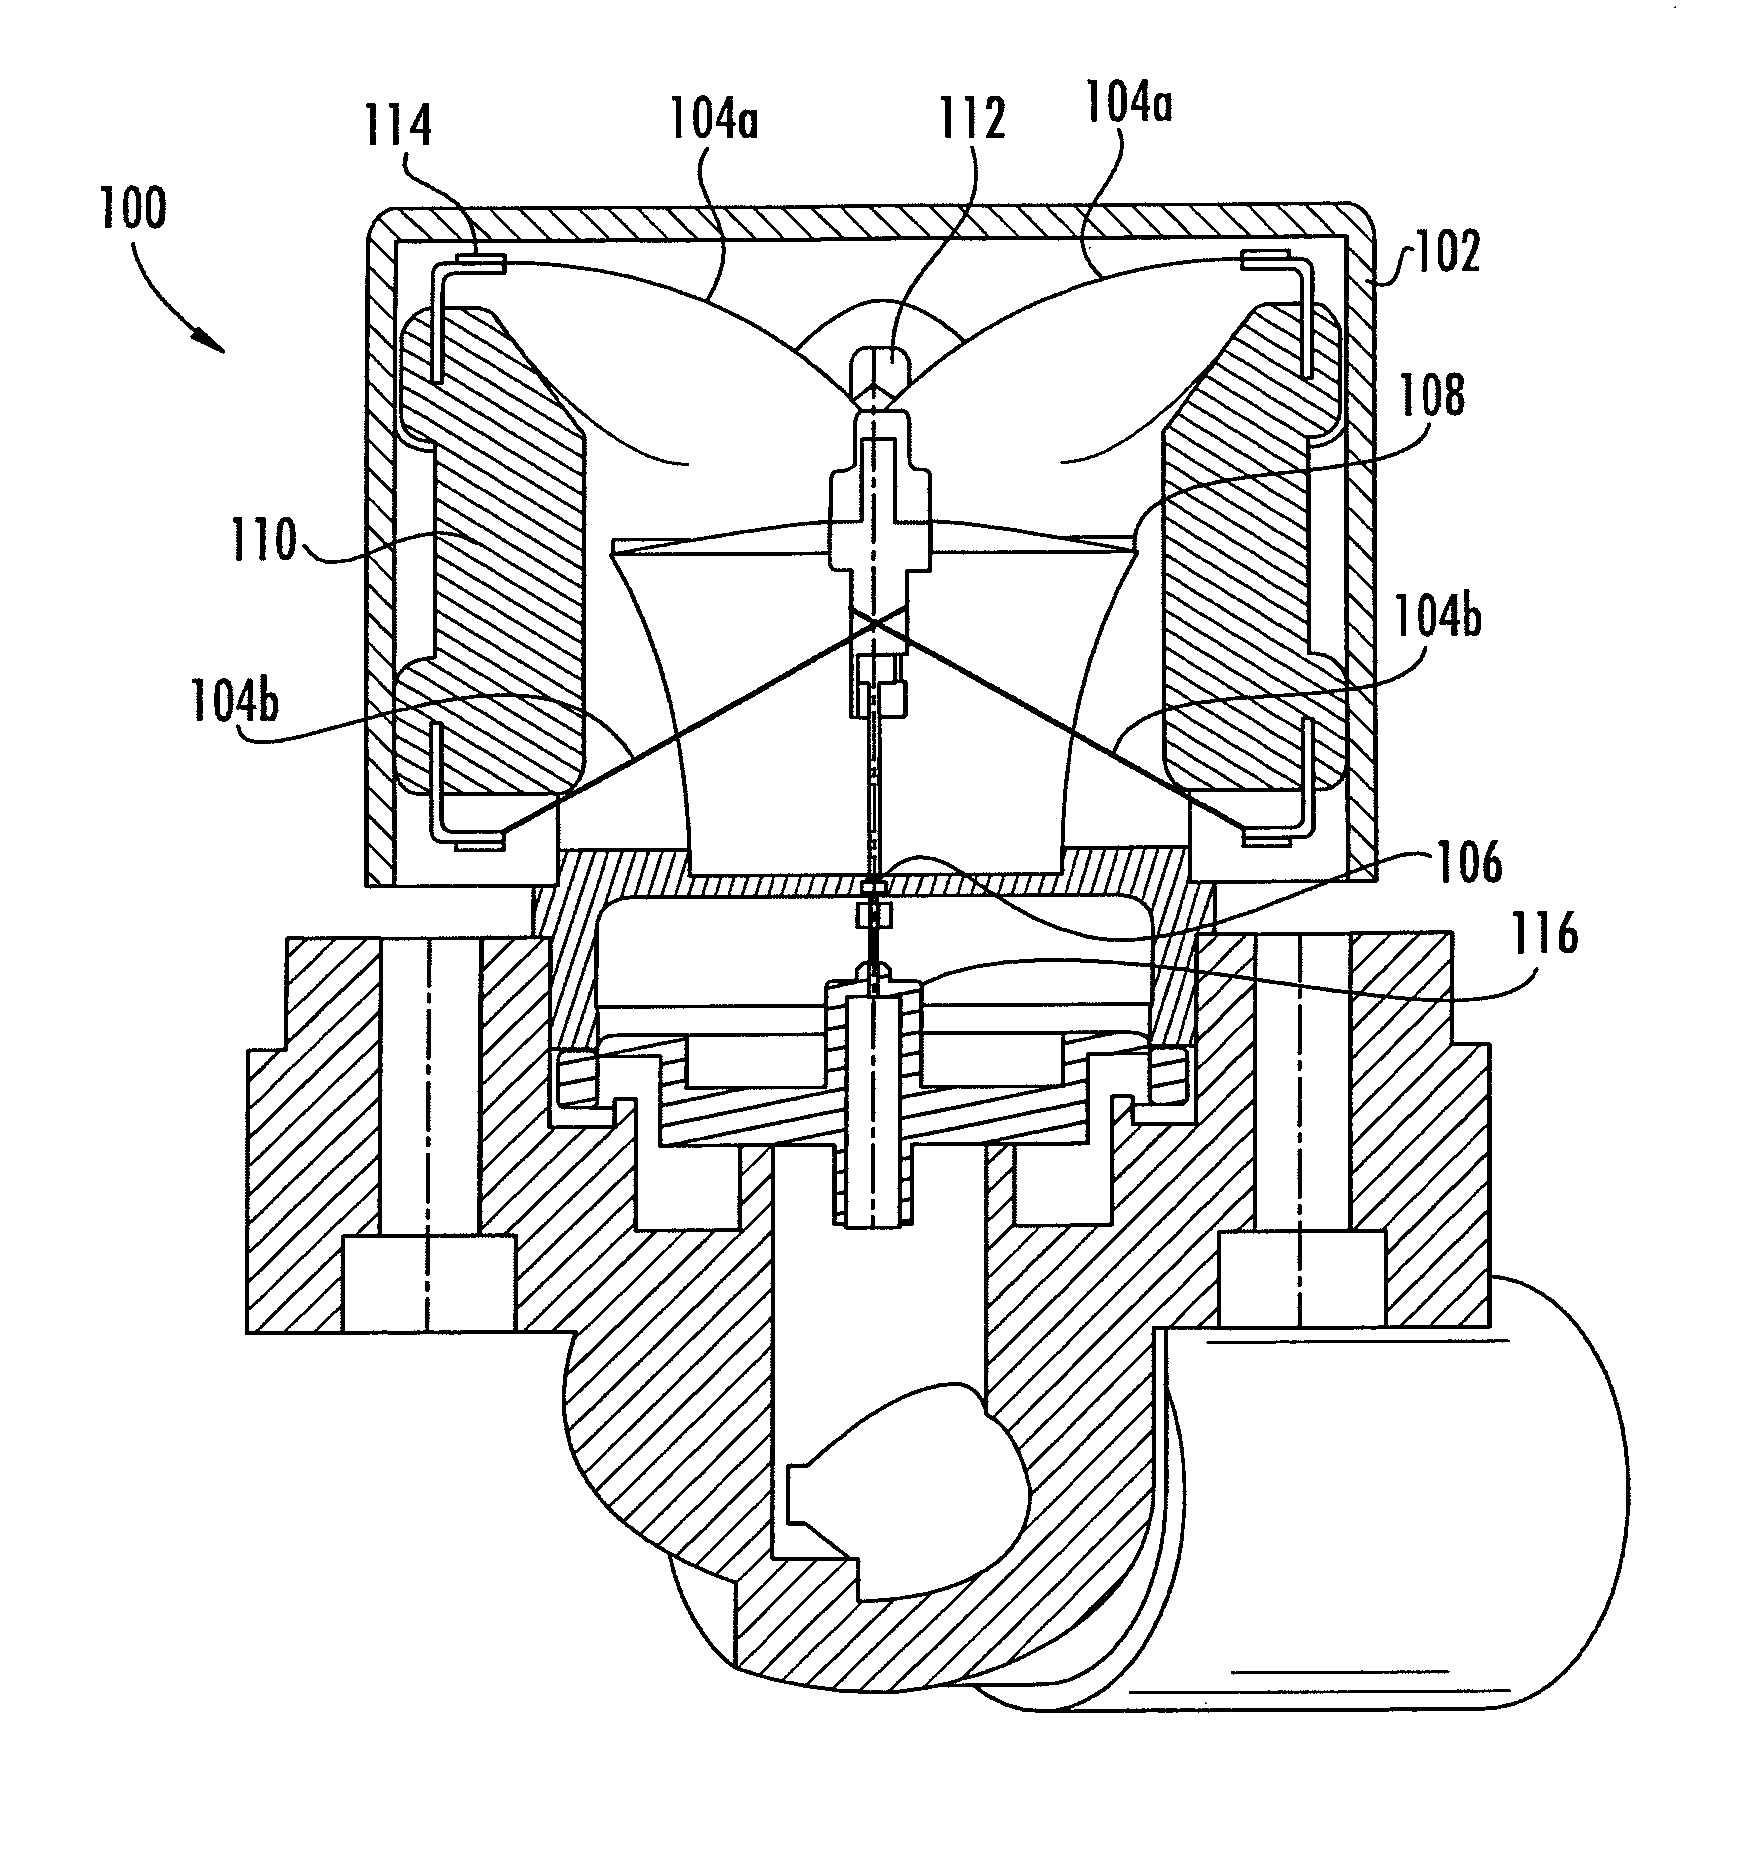 Multi-stable actuation apparatus and methods for making and using the same